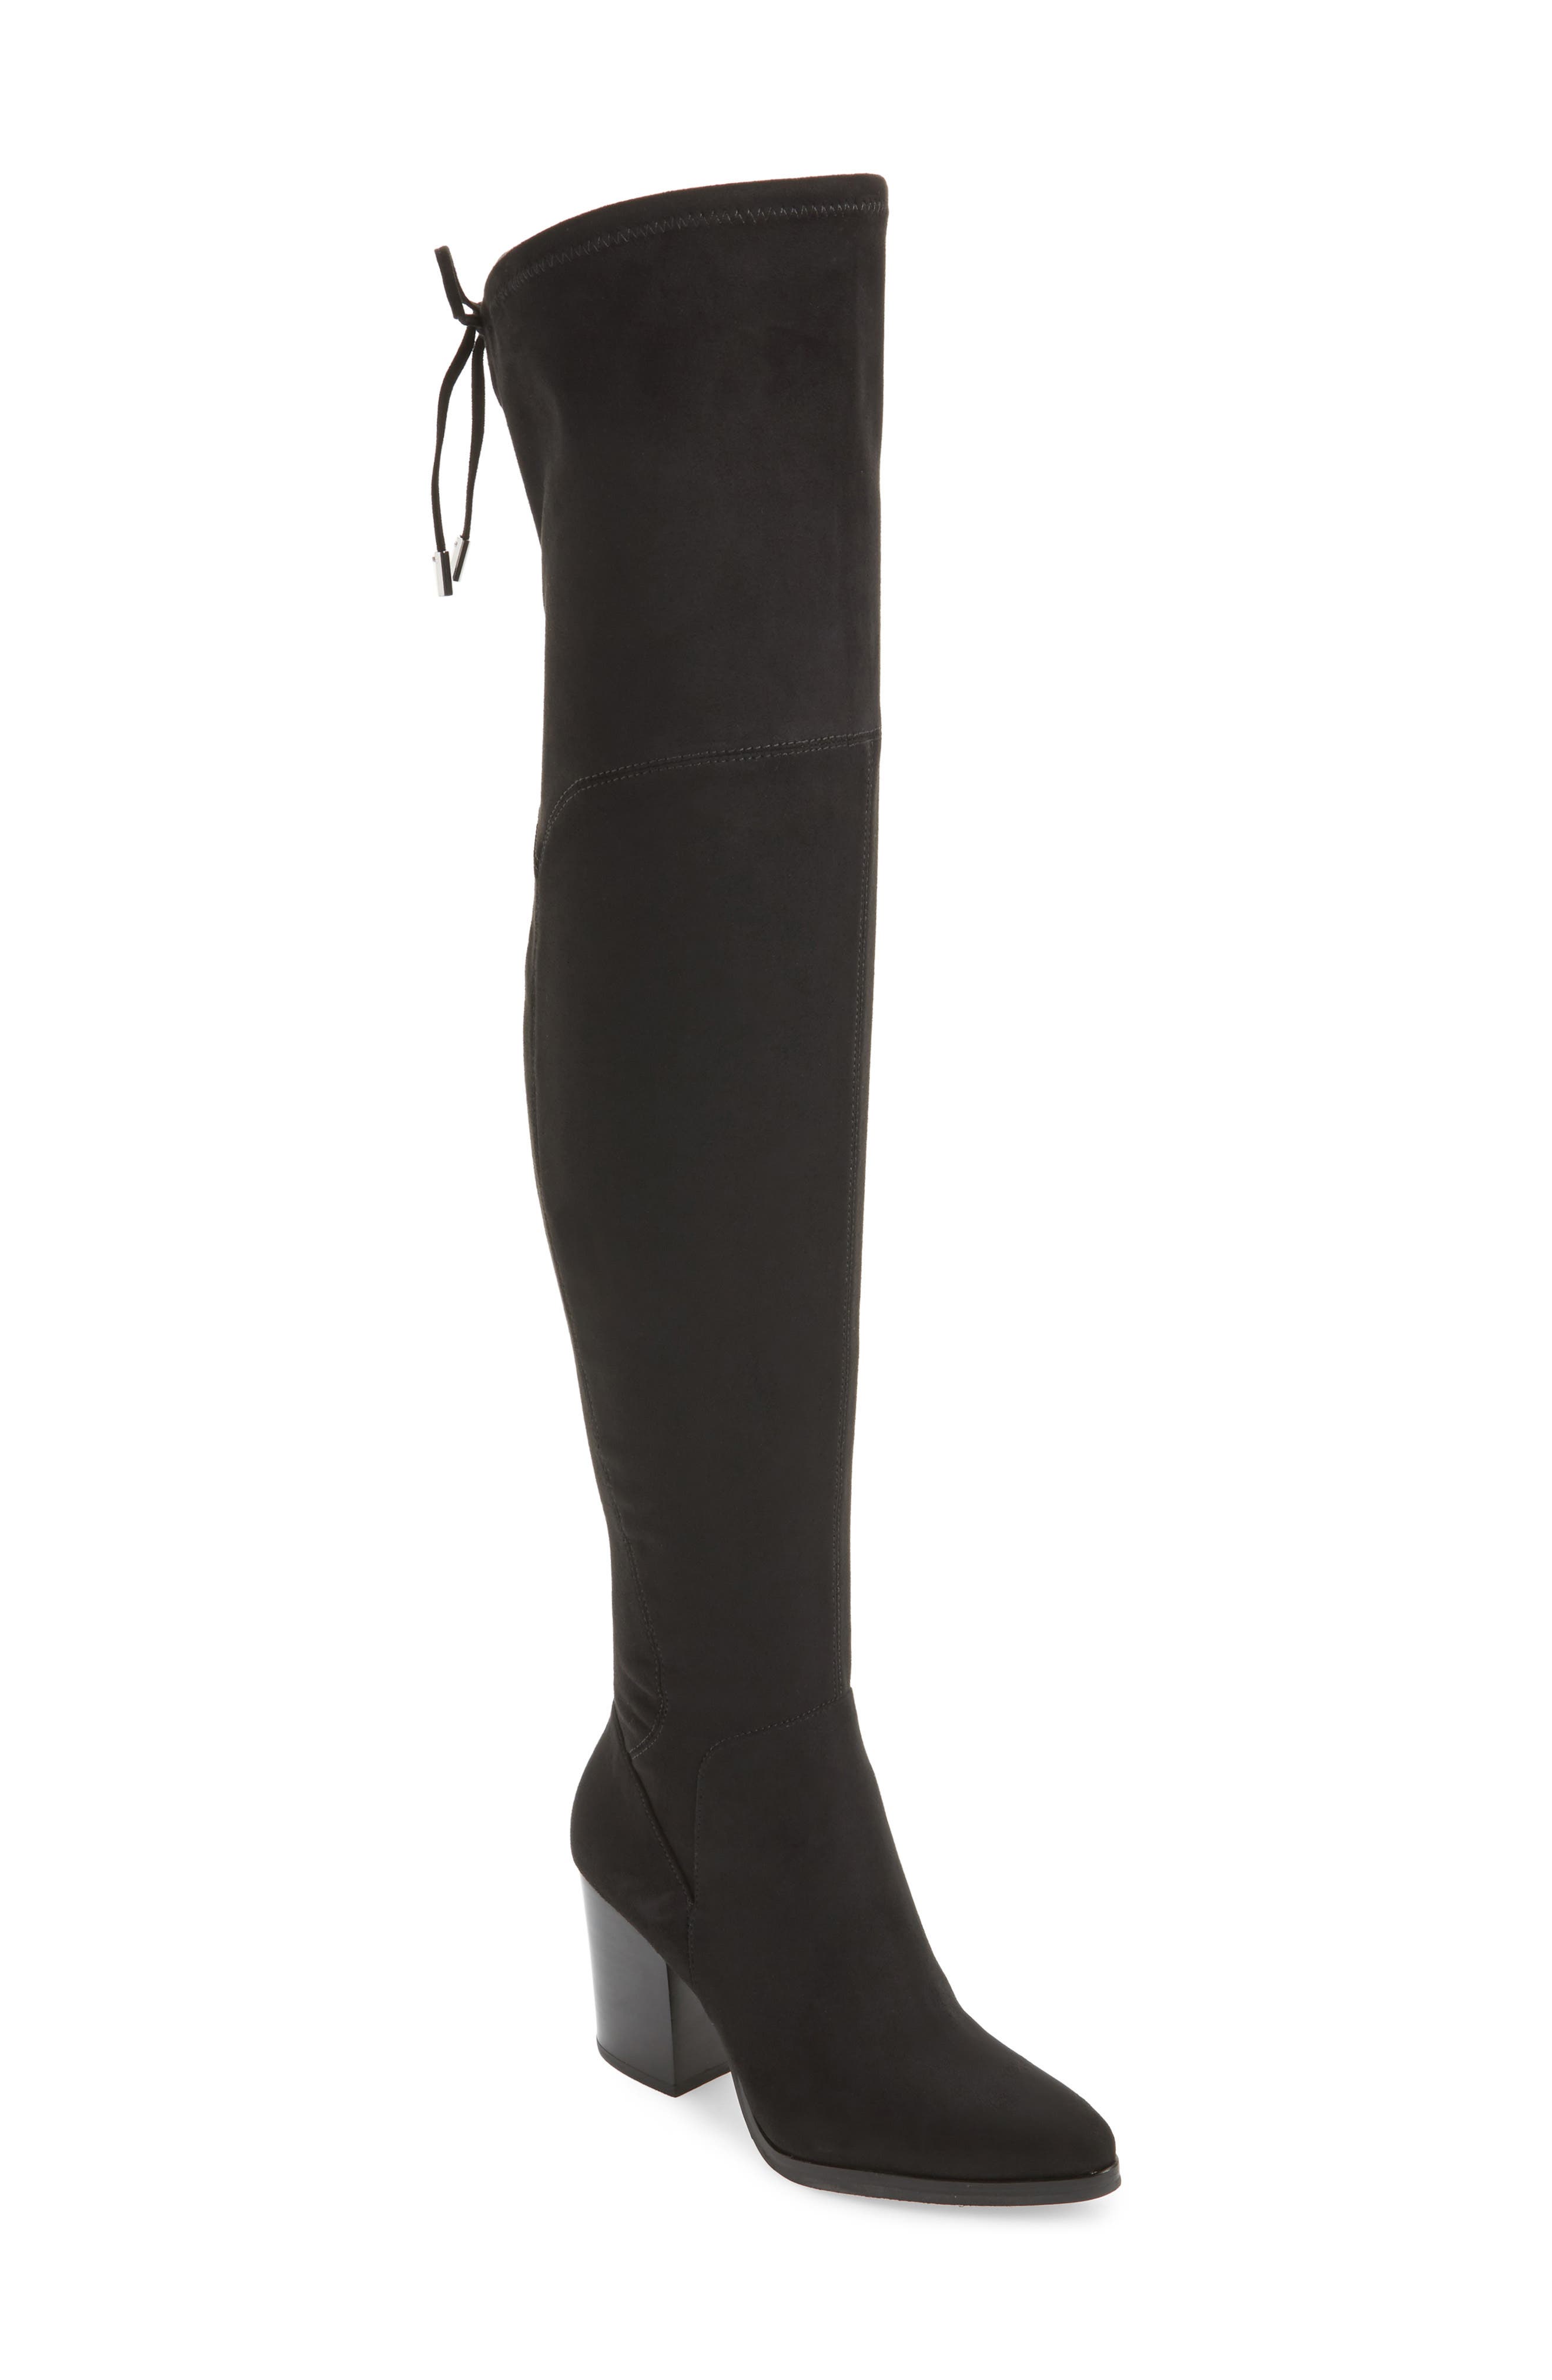 marc fisher adora over the knee boot